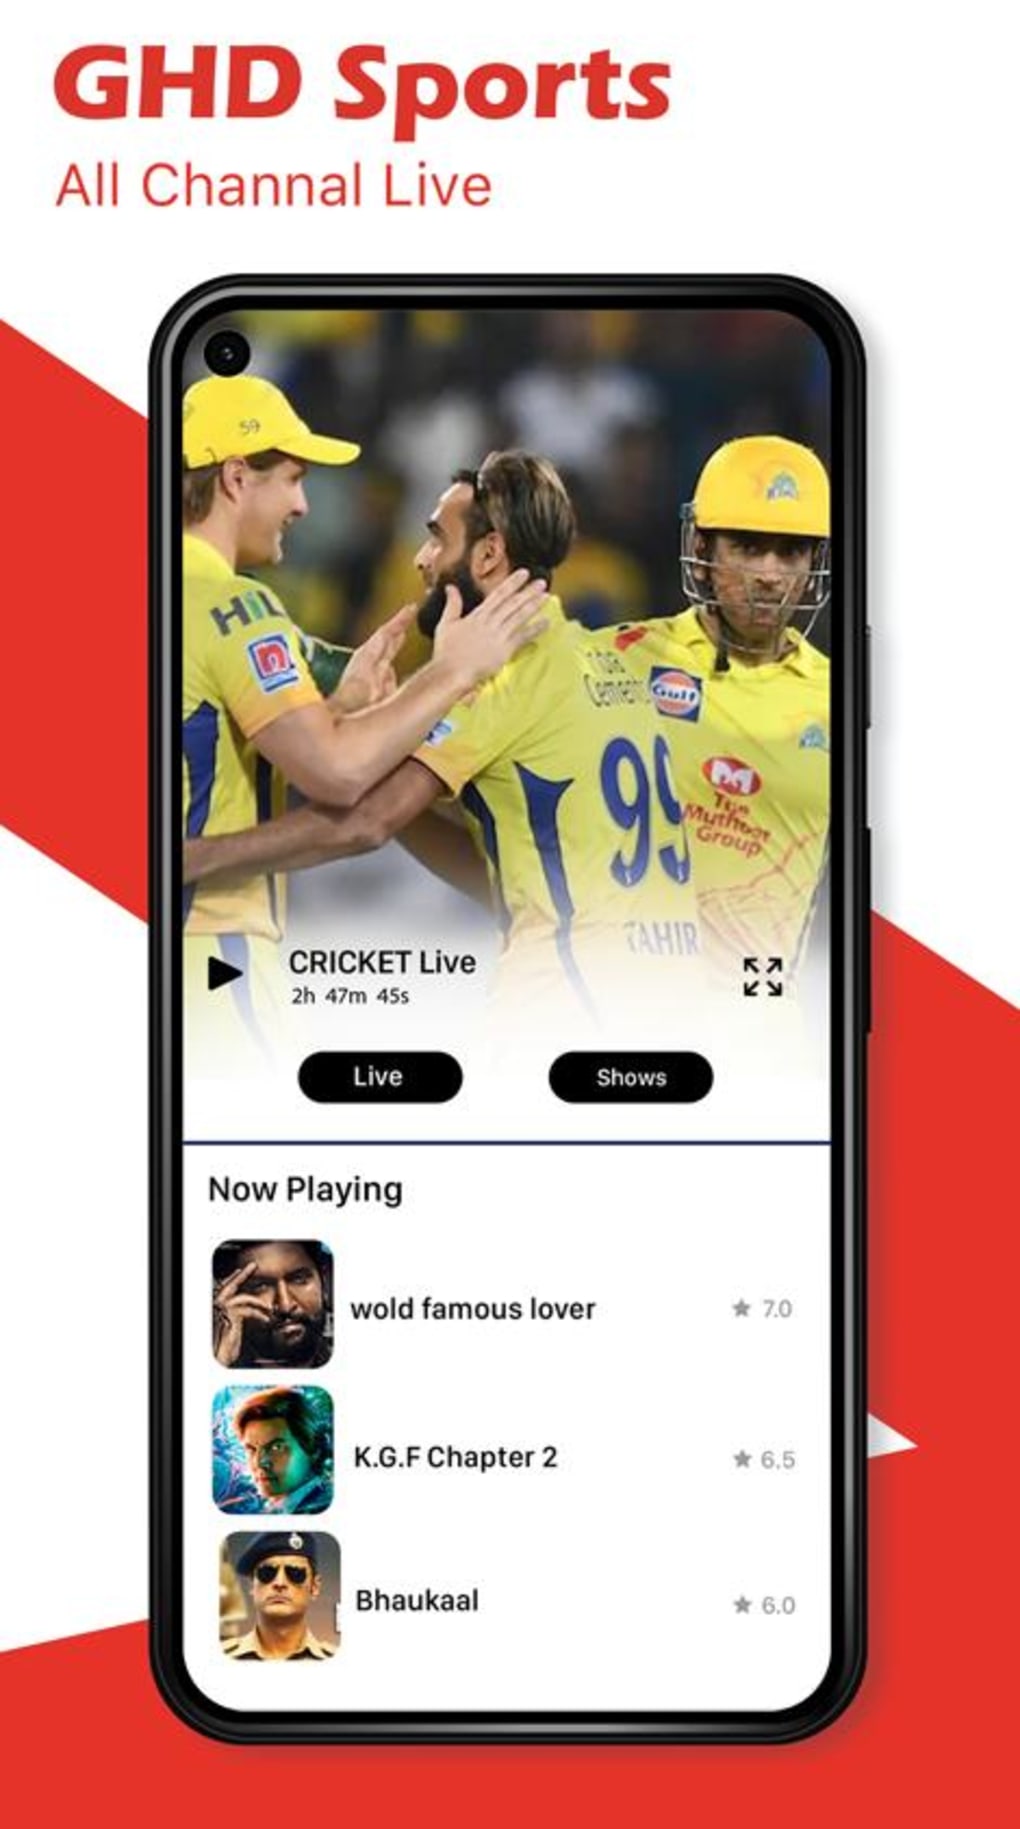 Live Sports GHD TV Guide for Android